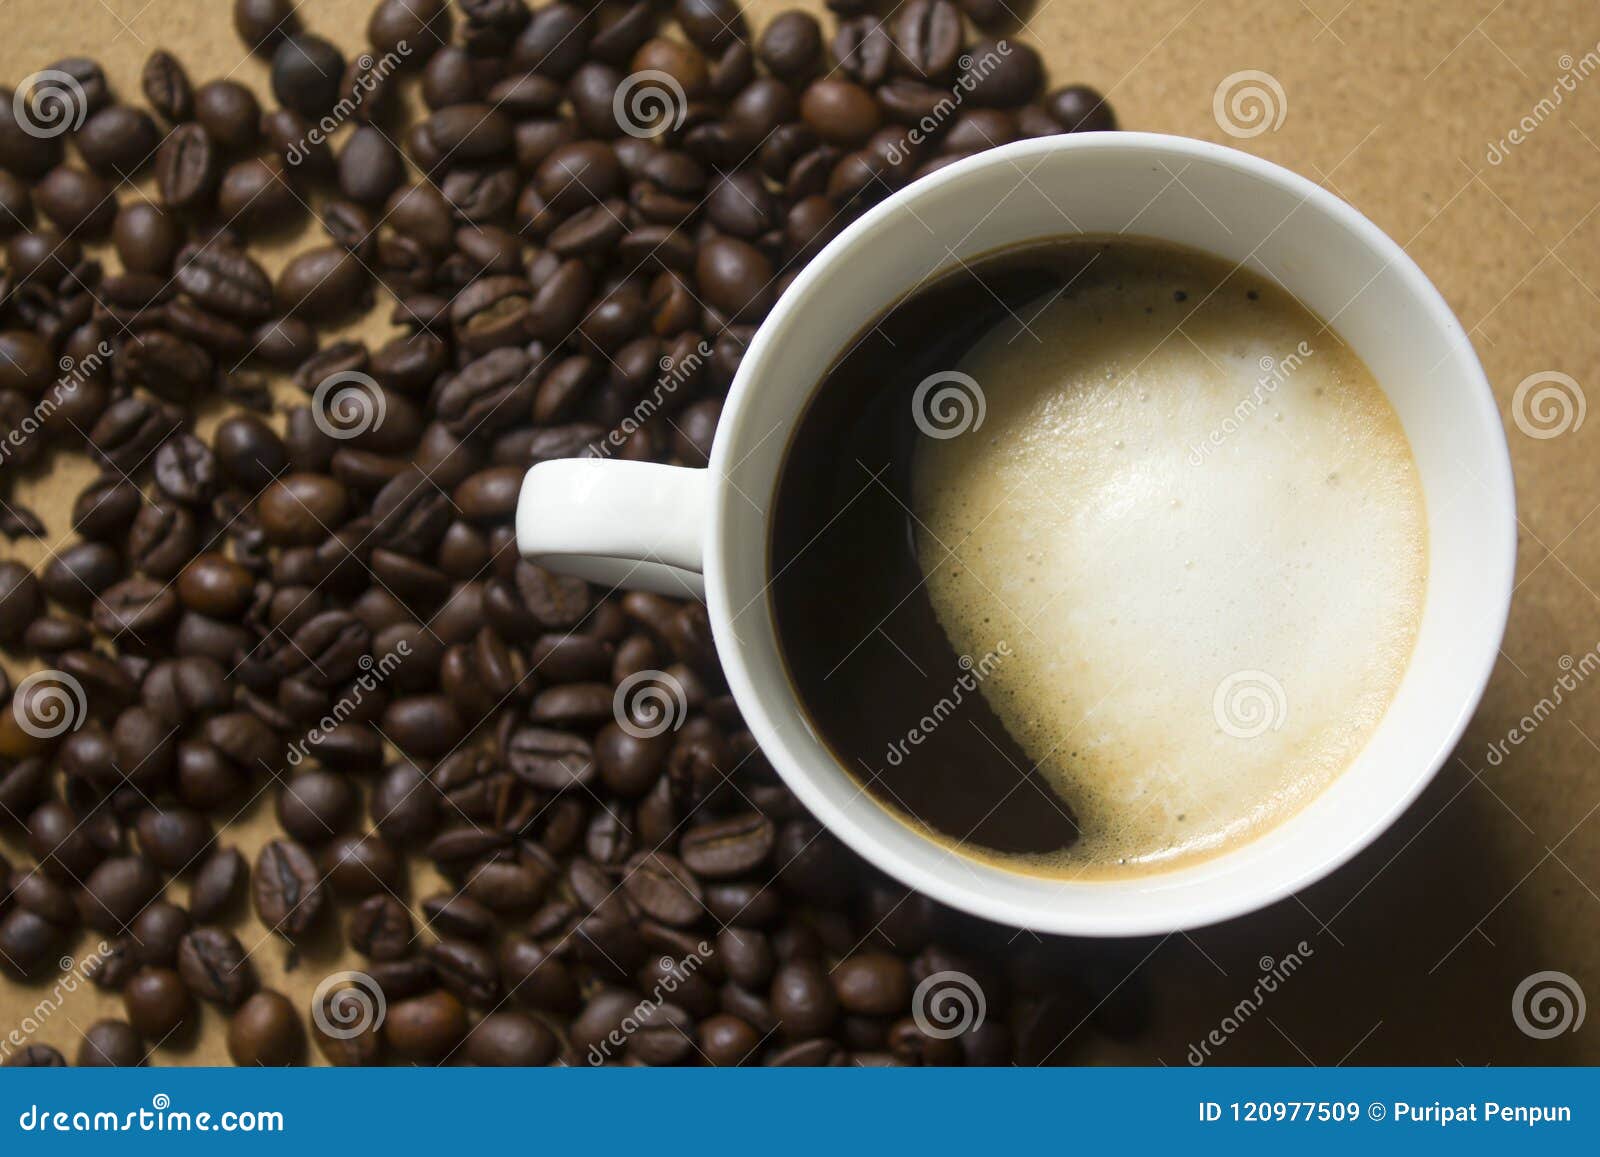 milk froth in coffee mugs and coffee beans